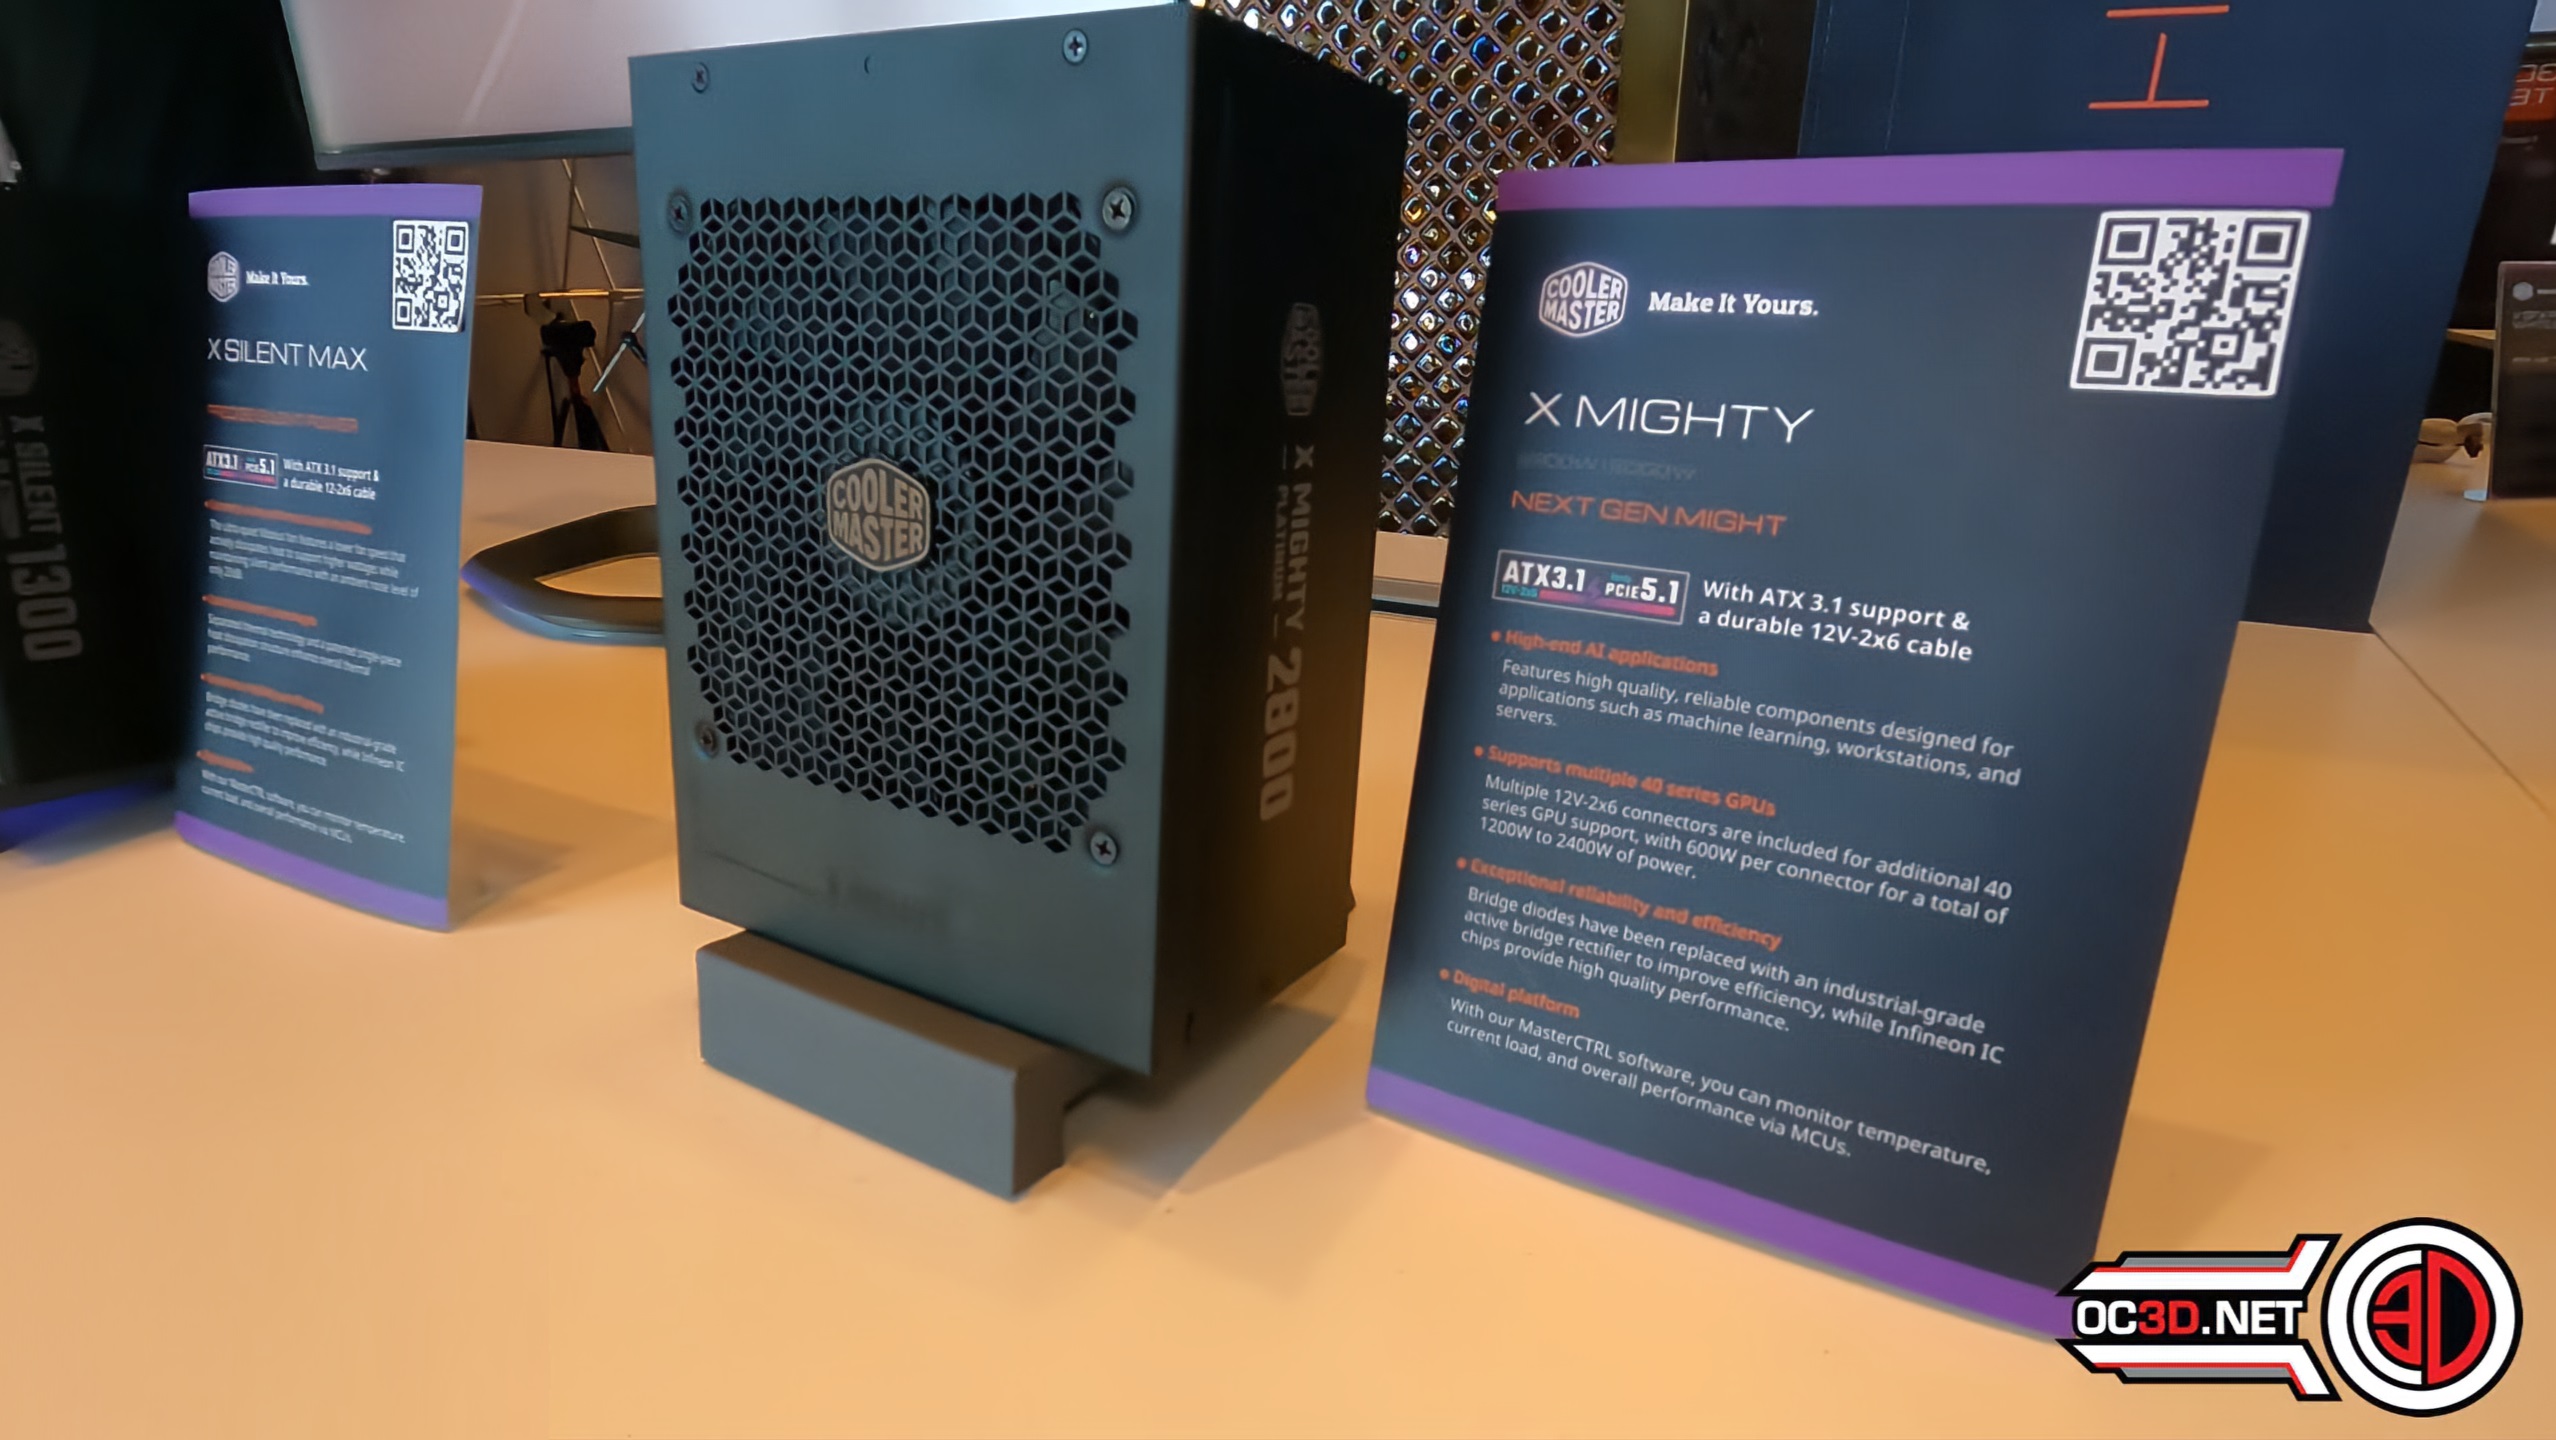 Mightier than expected! Cooler Master reveals their 2800W X Mighty PSU at CES 2024